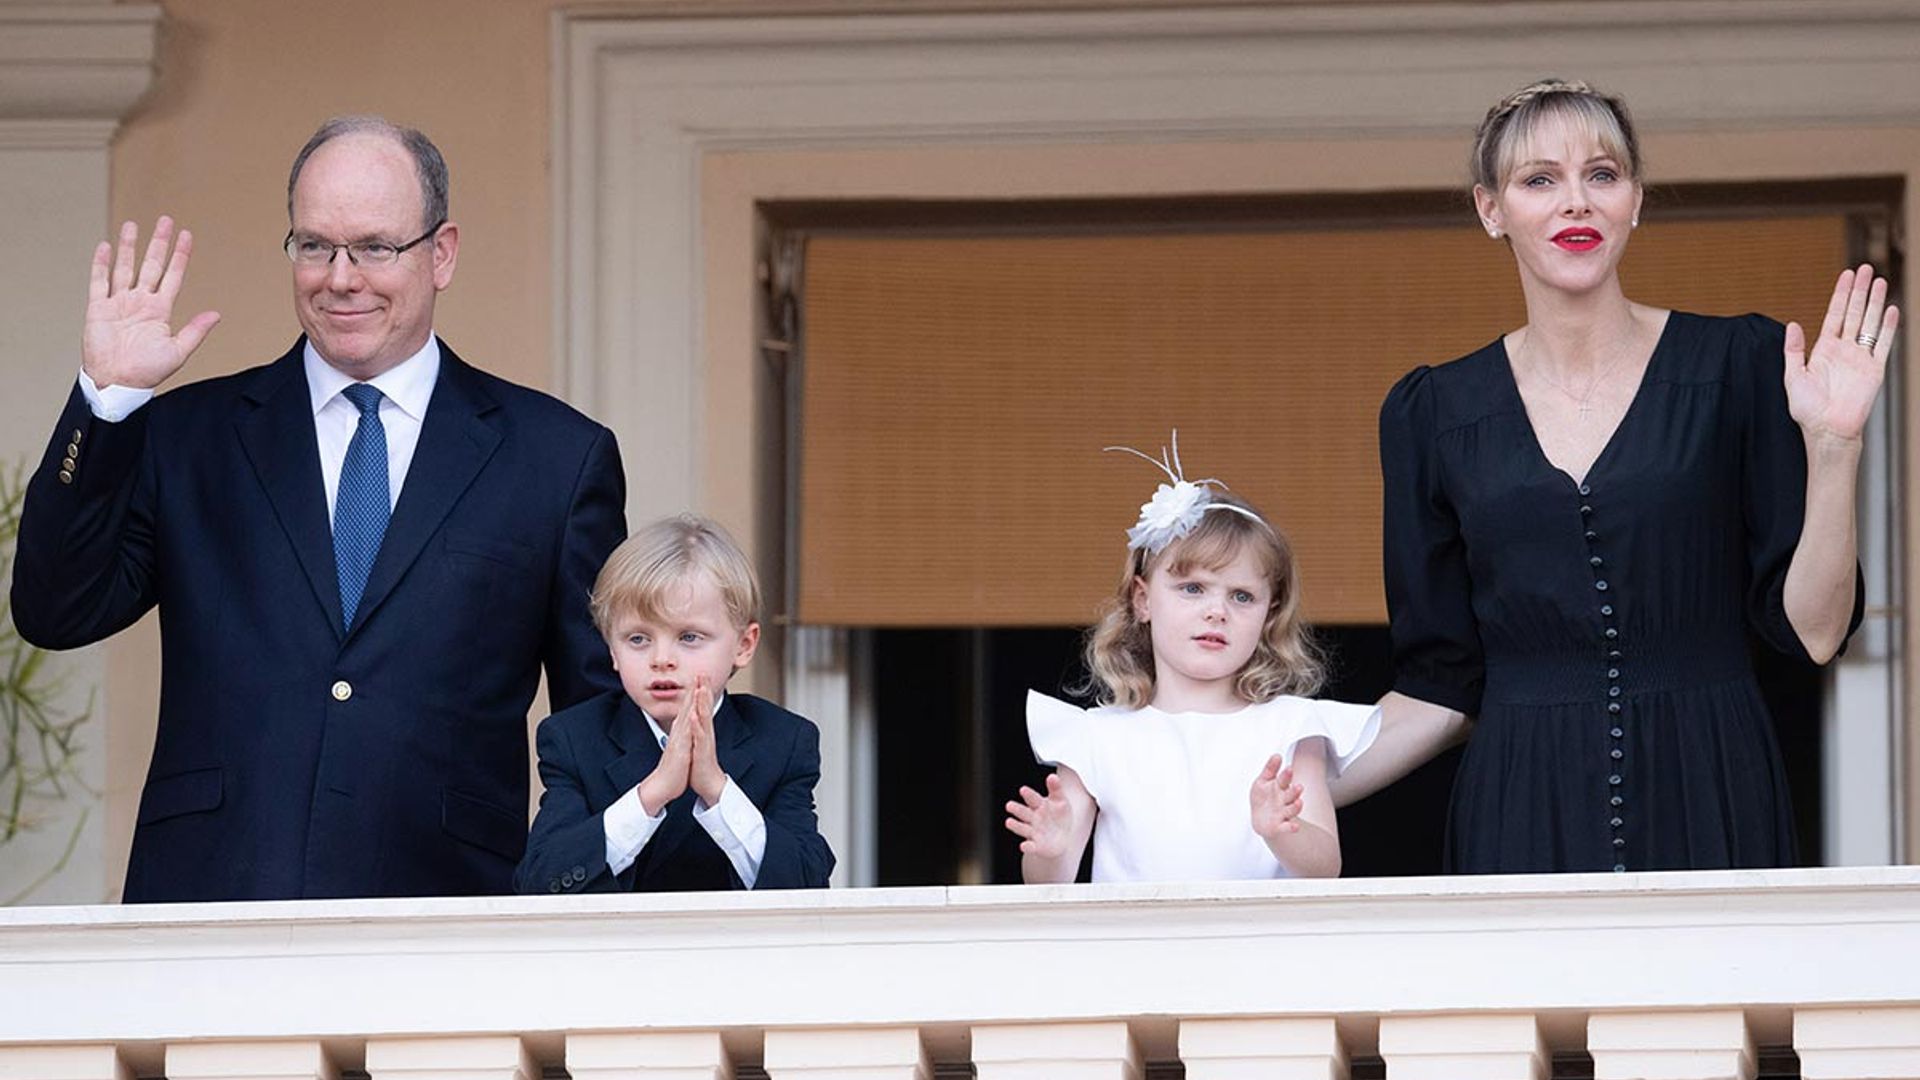 Princess Charlene features in royal family Christmas card whilst she remains in treatment centre